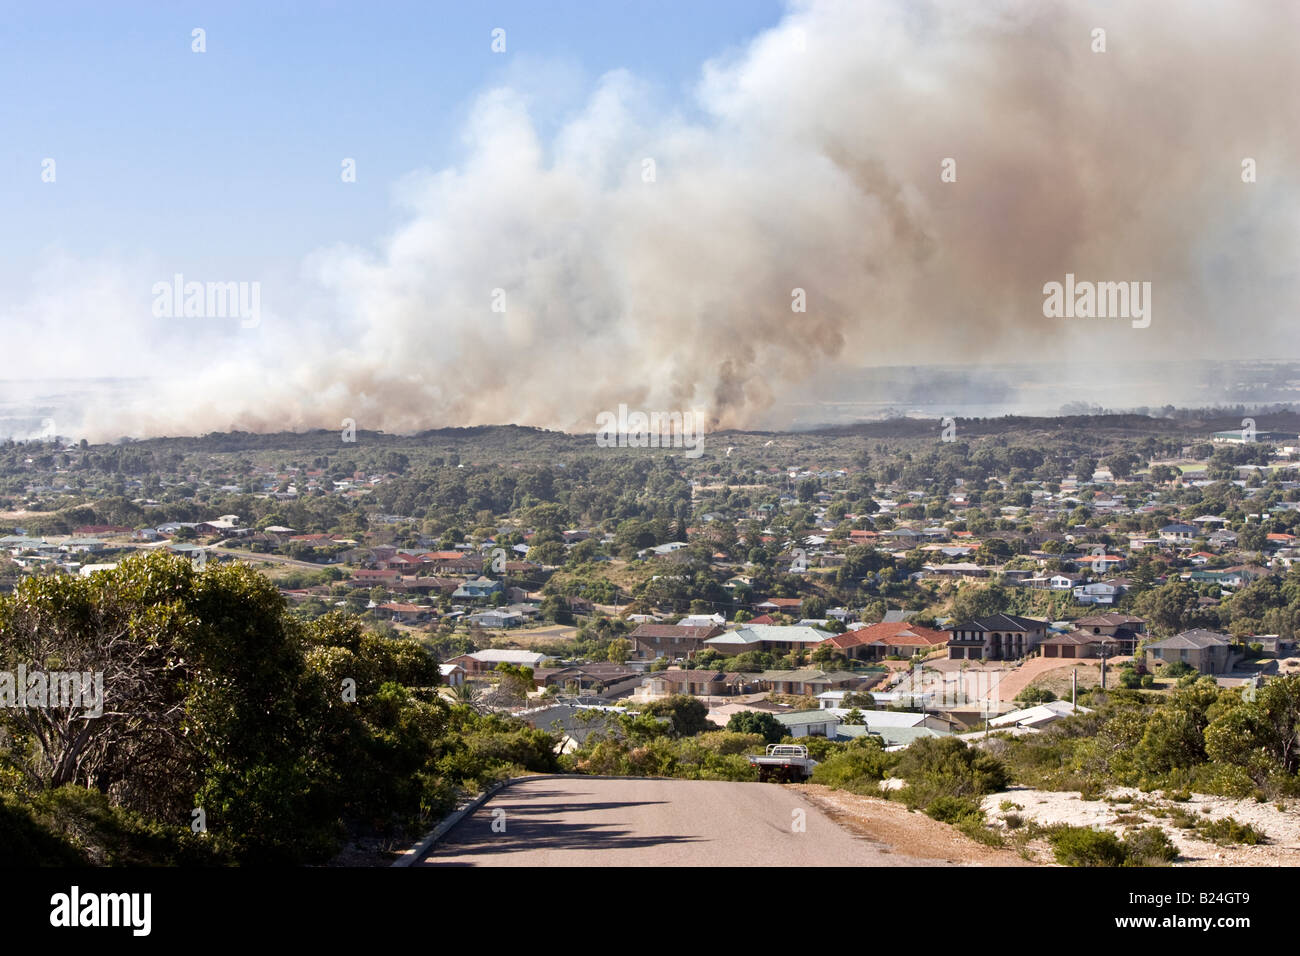 A fire raging in bushland next to houses in the town of Esperance in Western Australia. Stock Photo